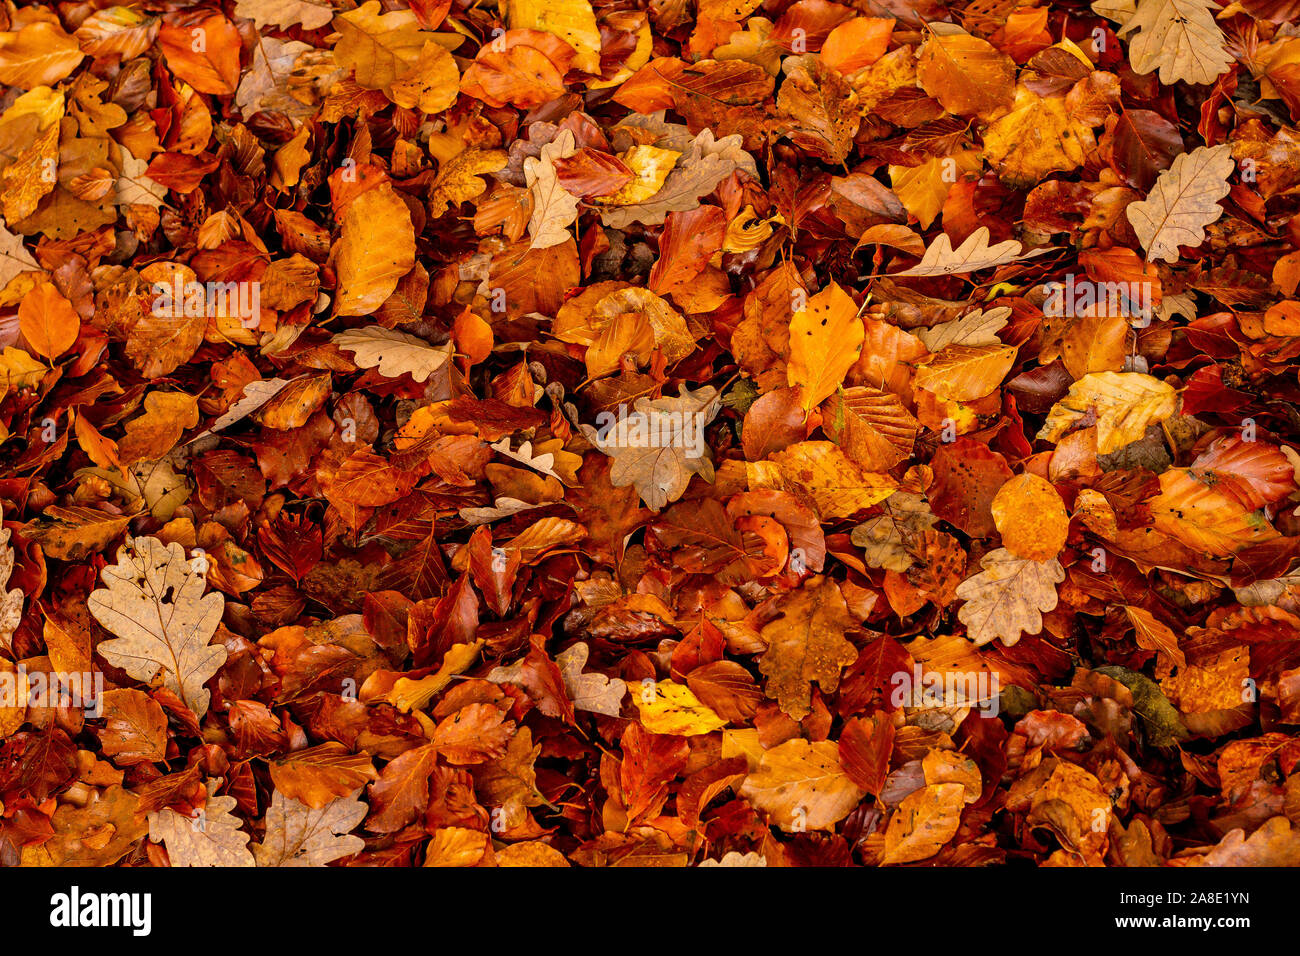 Carpet of autumn leaves on the ground Stock Photo